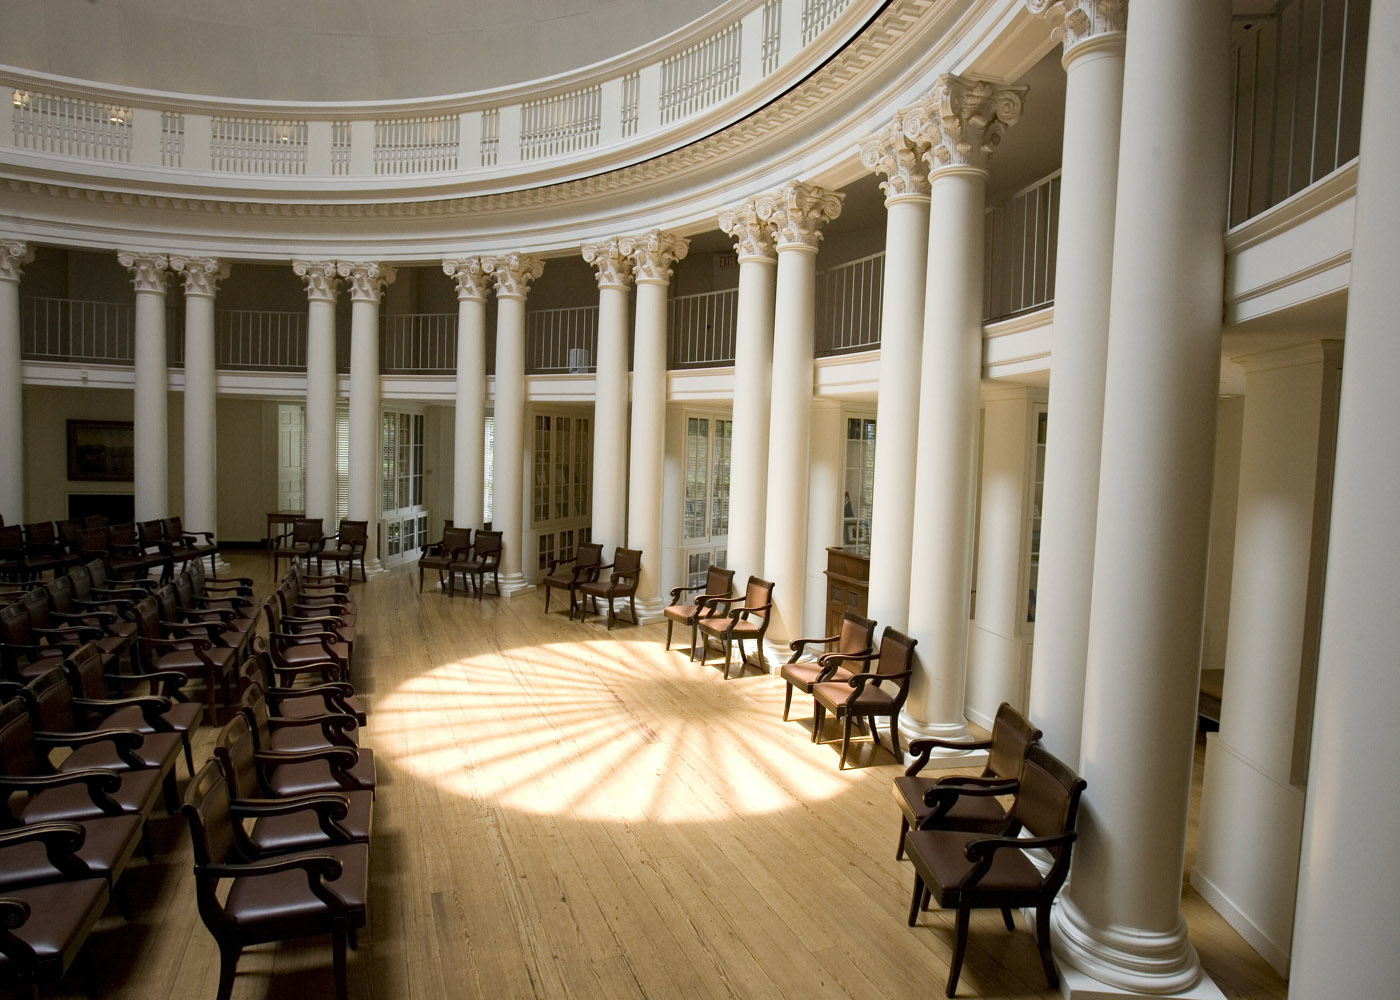 Chairs set up in rows in the Rotunda's Dome room